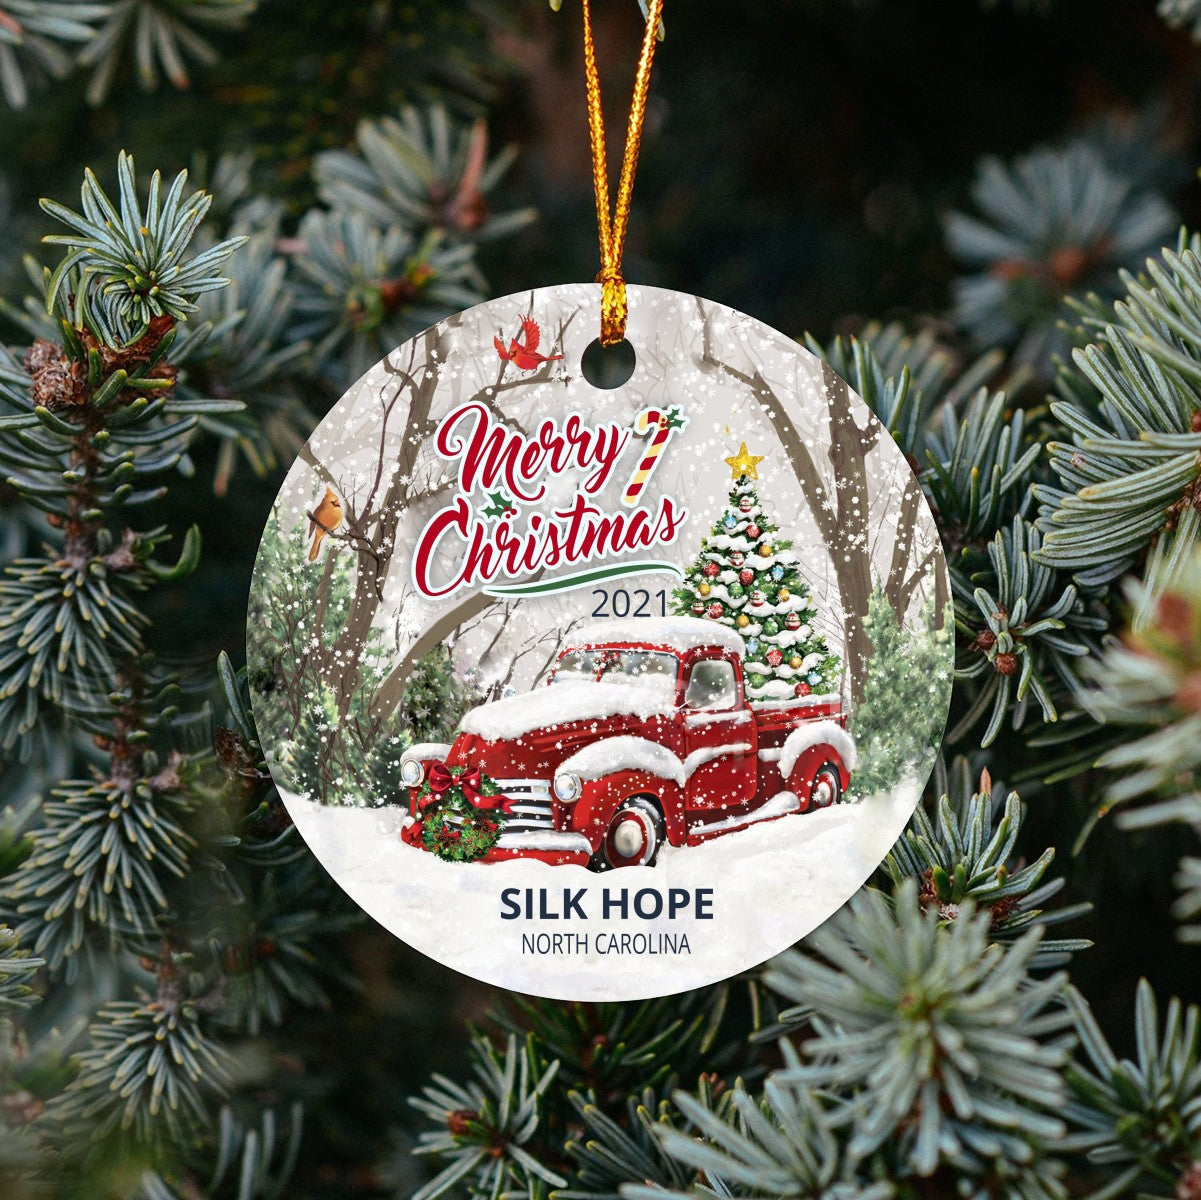 Christmas Tree Ornaments Silk Hope - Ornament With Name City, State Silk Hope North Carolina NC Ornament - Red Truck Xmas Ornaments 3'' Plastic Gift For Family, Friend And Housewarming